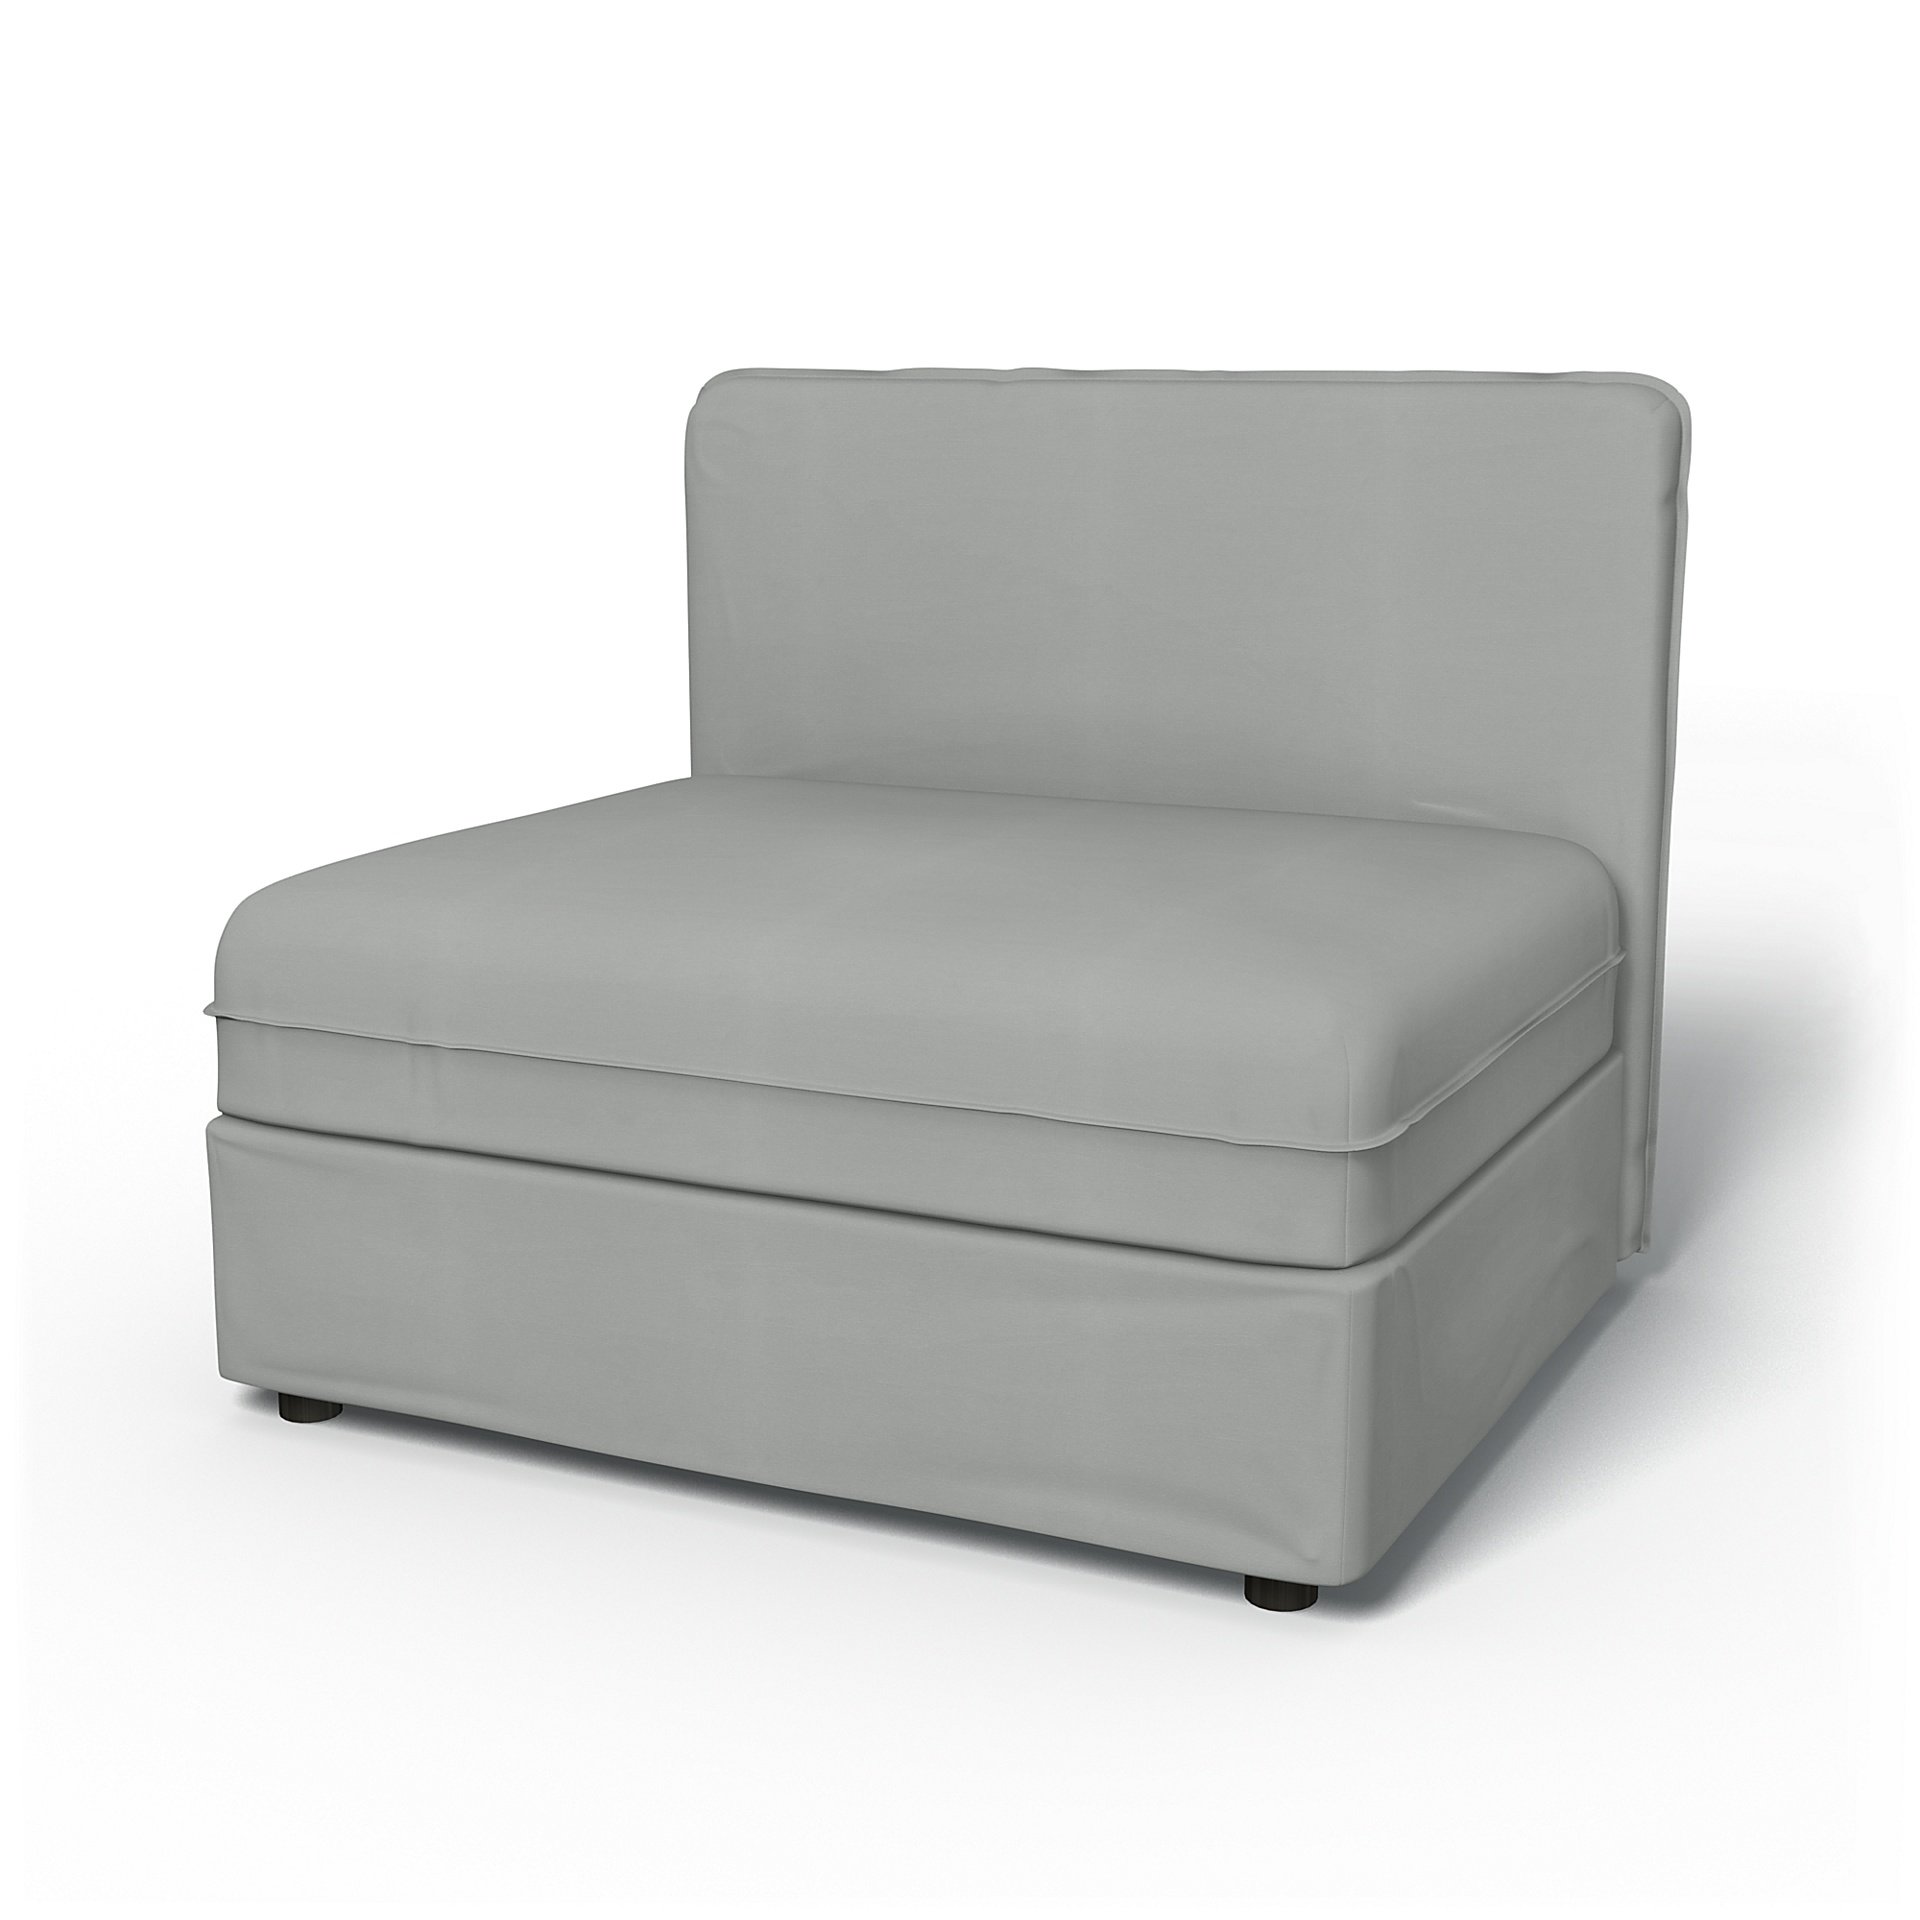 IKEA - Vallentuna Seat Module with Low Back Cover 100x80cm 39x32in, Silver Grey, Cotton - Bemz